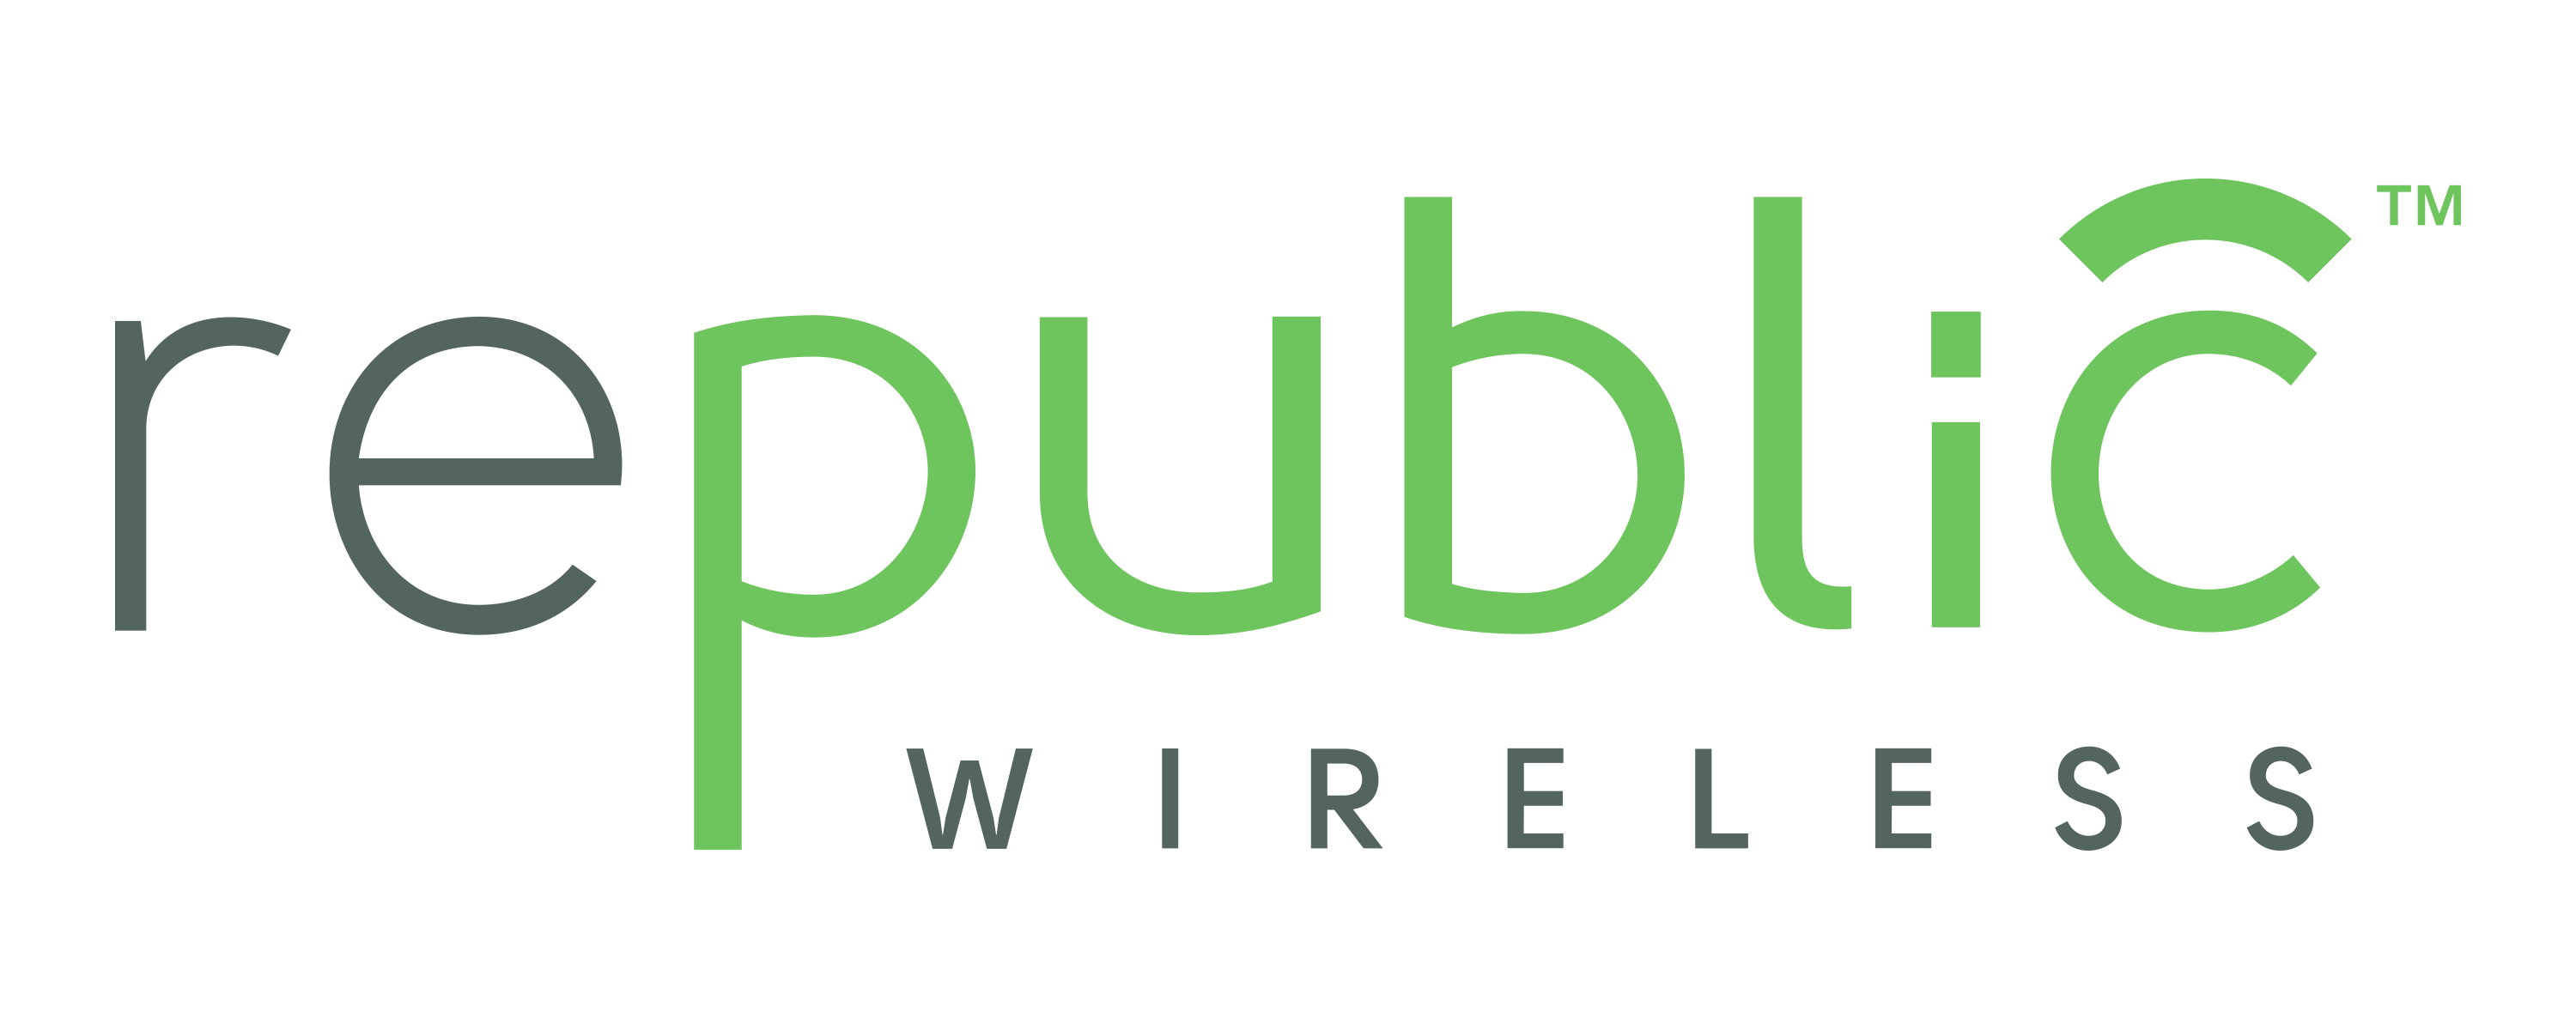 With "WiFi first" plans starting for as little as $15 a month, Republic Wireless continues to raise the bar and usher in a new era in consumer smartphone service.